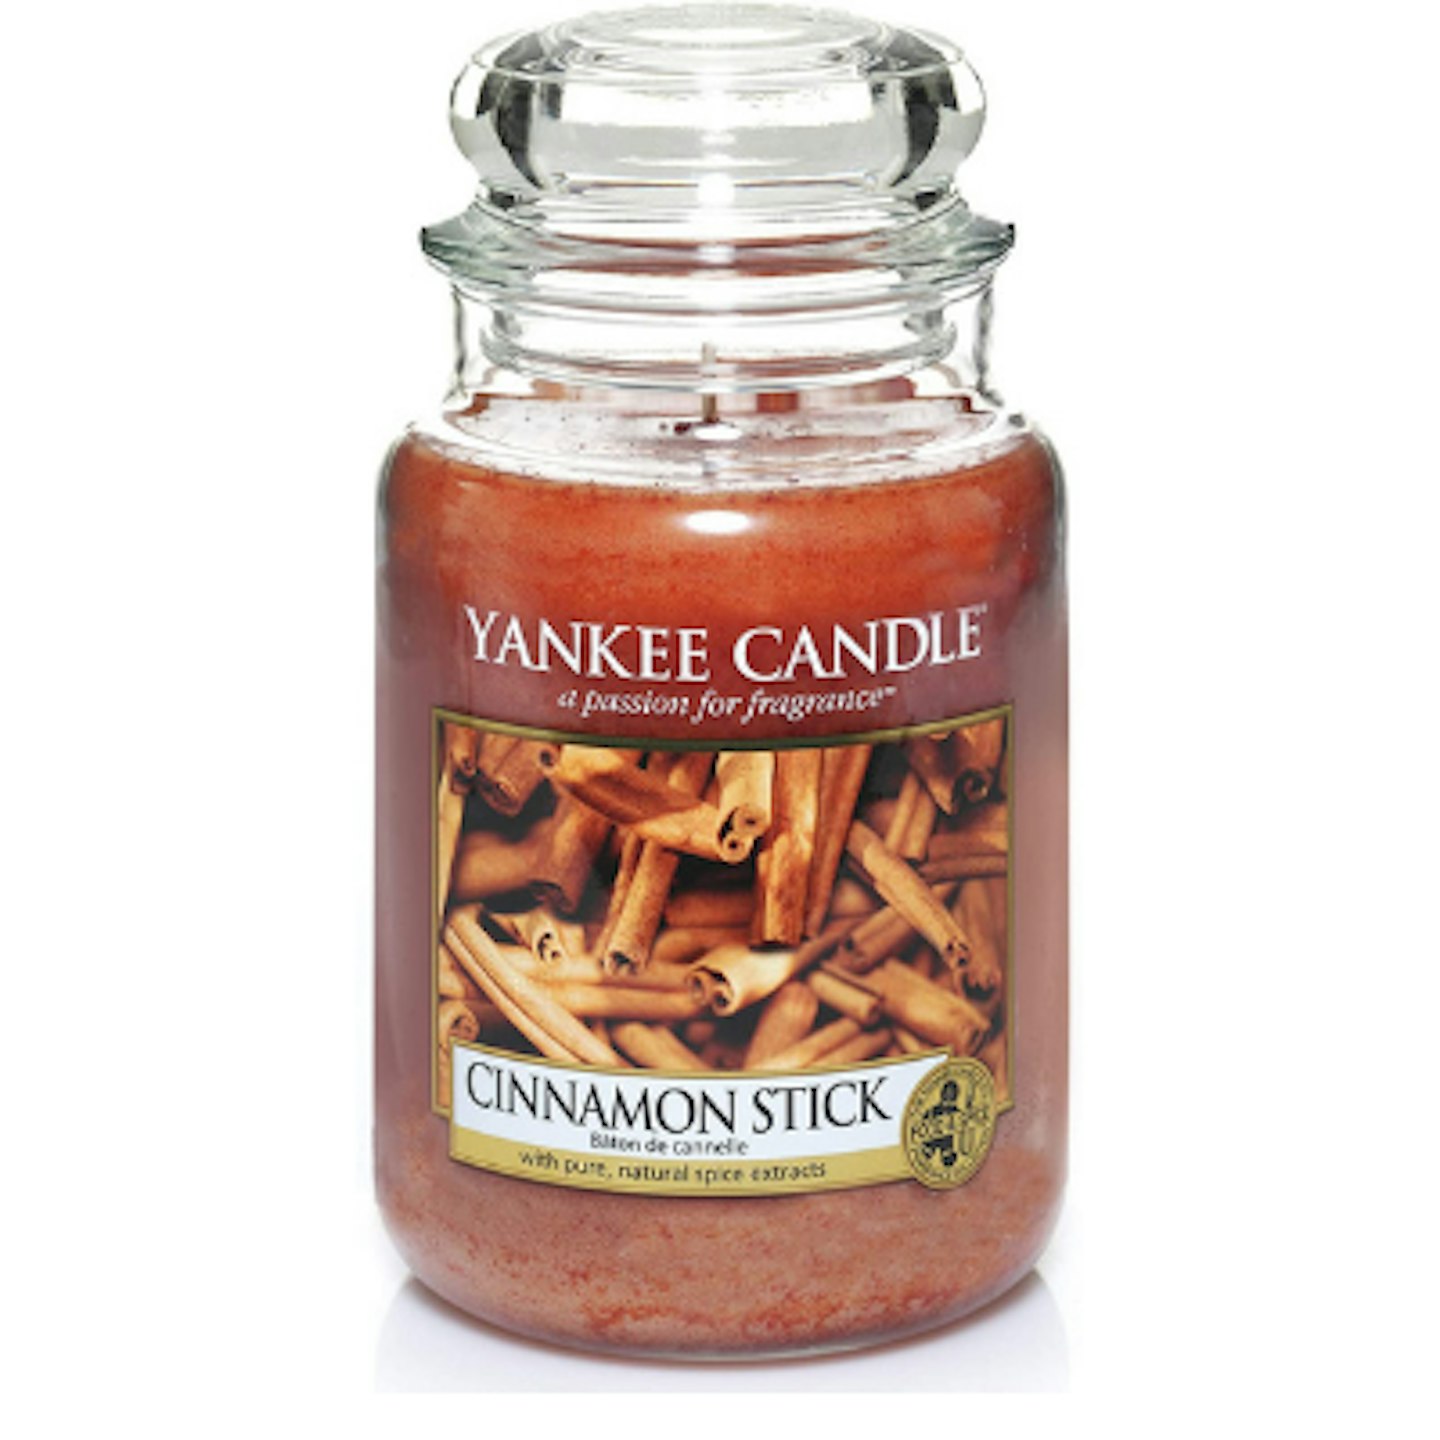 Yankee Candle Scented Candle